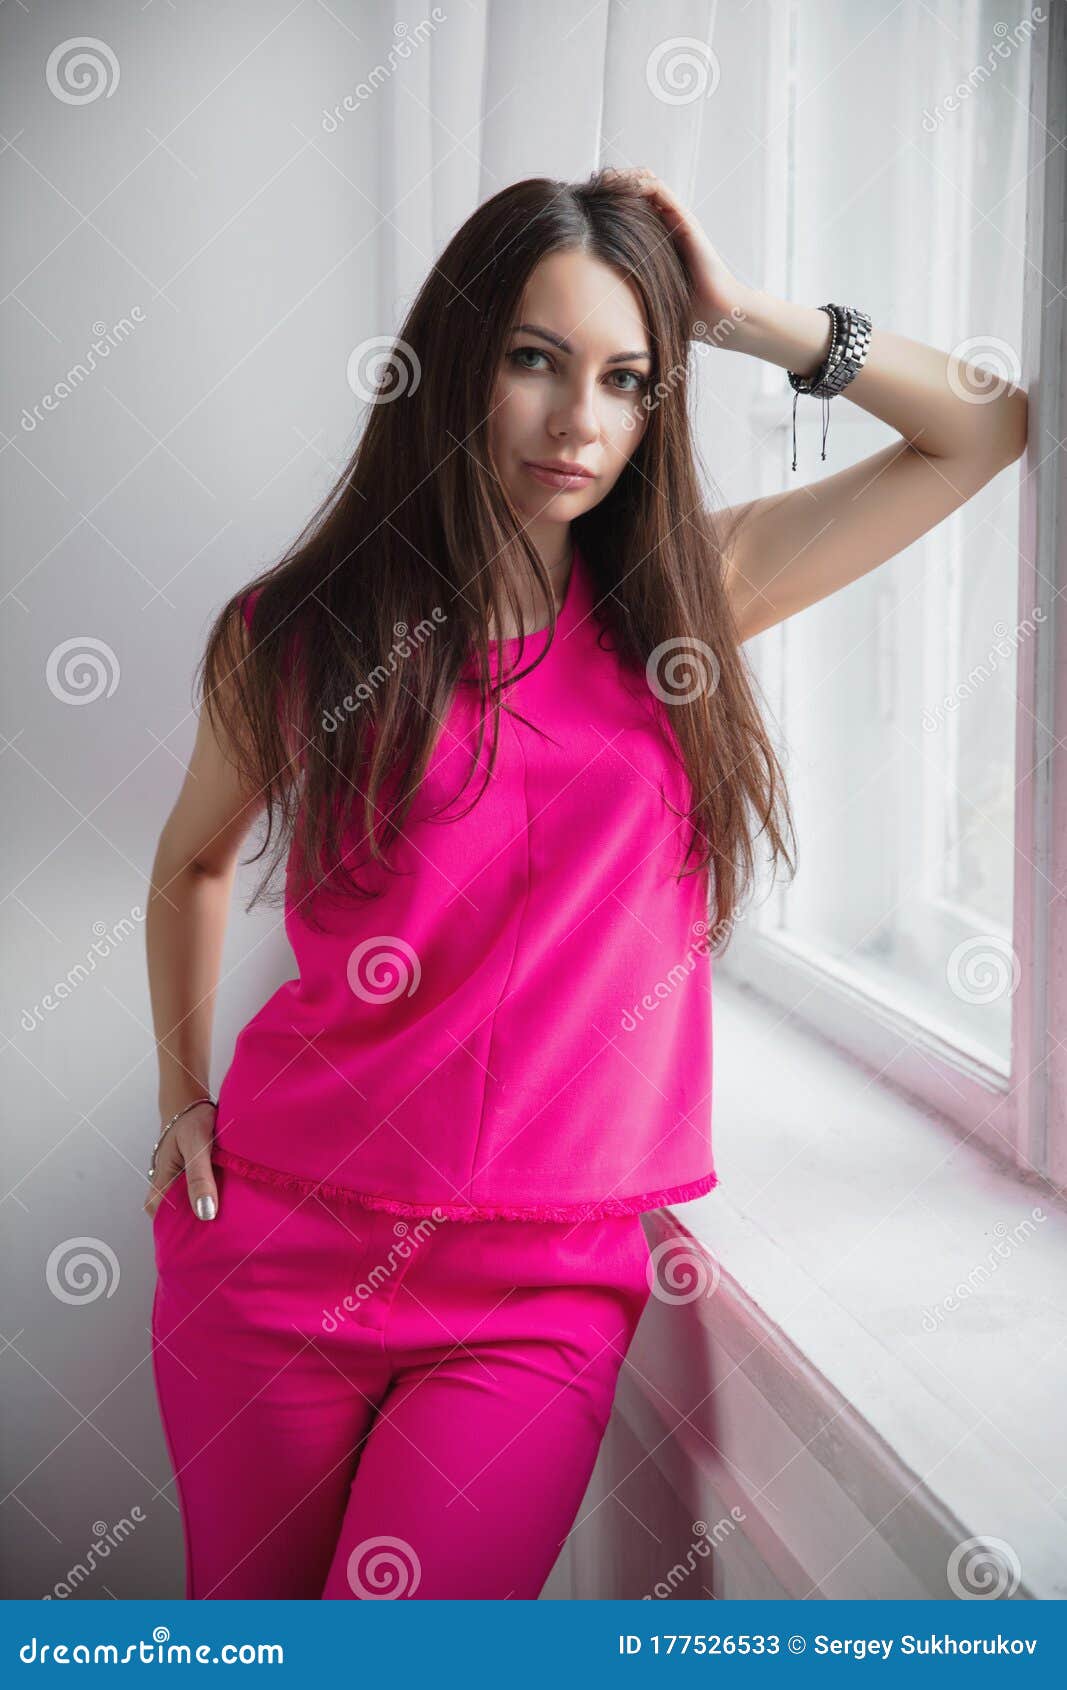 Nice Young Woman Posing in Studio Stock Image - Image of attractive ...